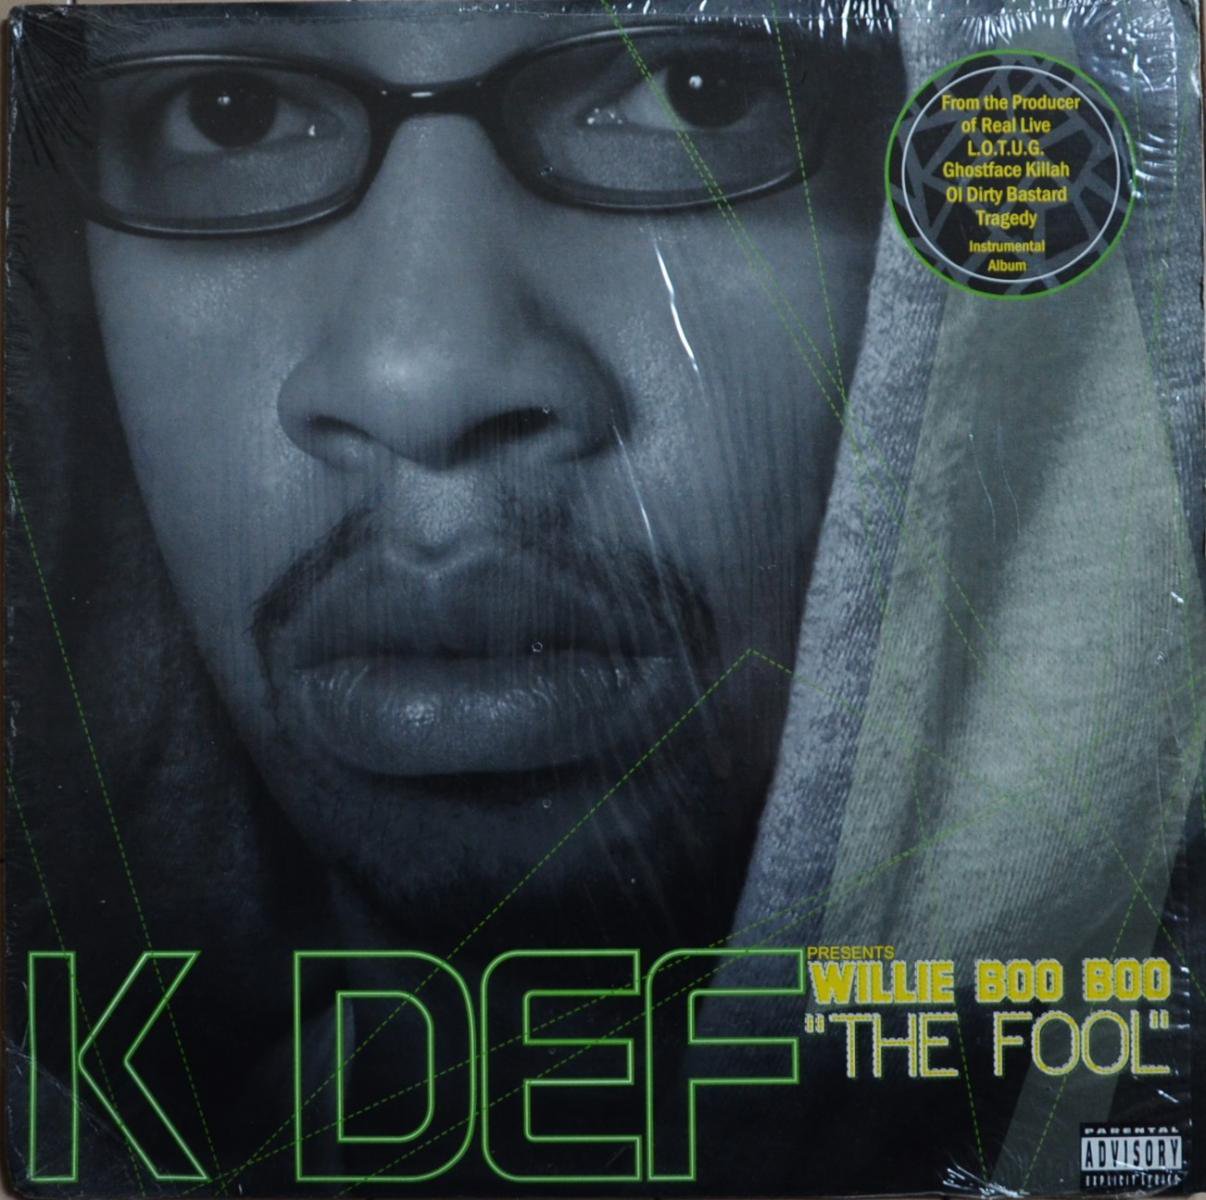 K-DEF PRESENTS WILLIE BOO BOO / THE FOOL (LP)